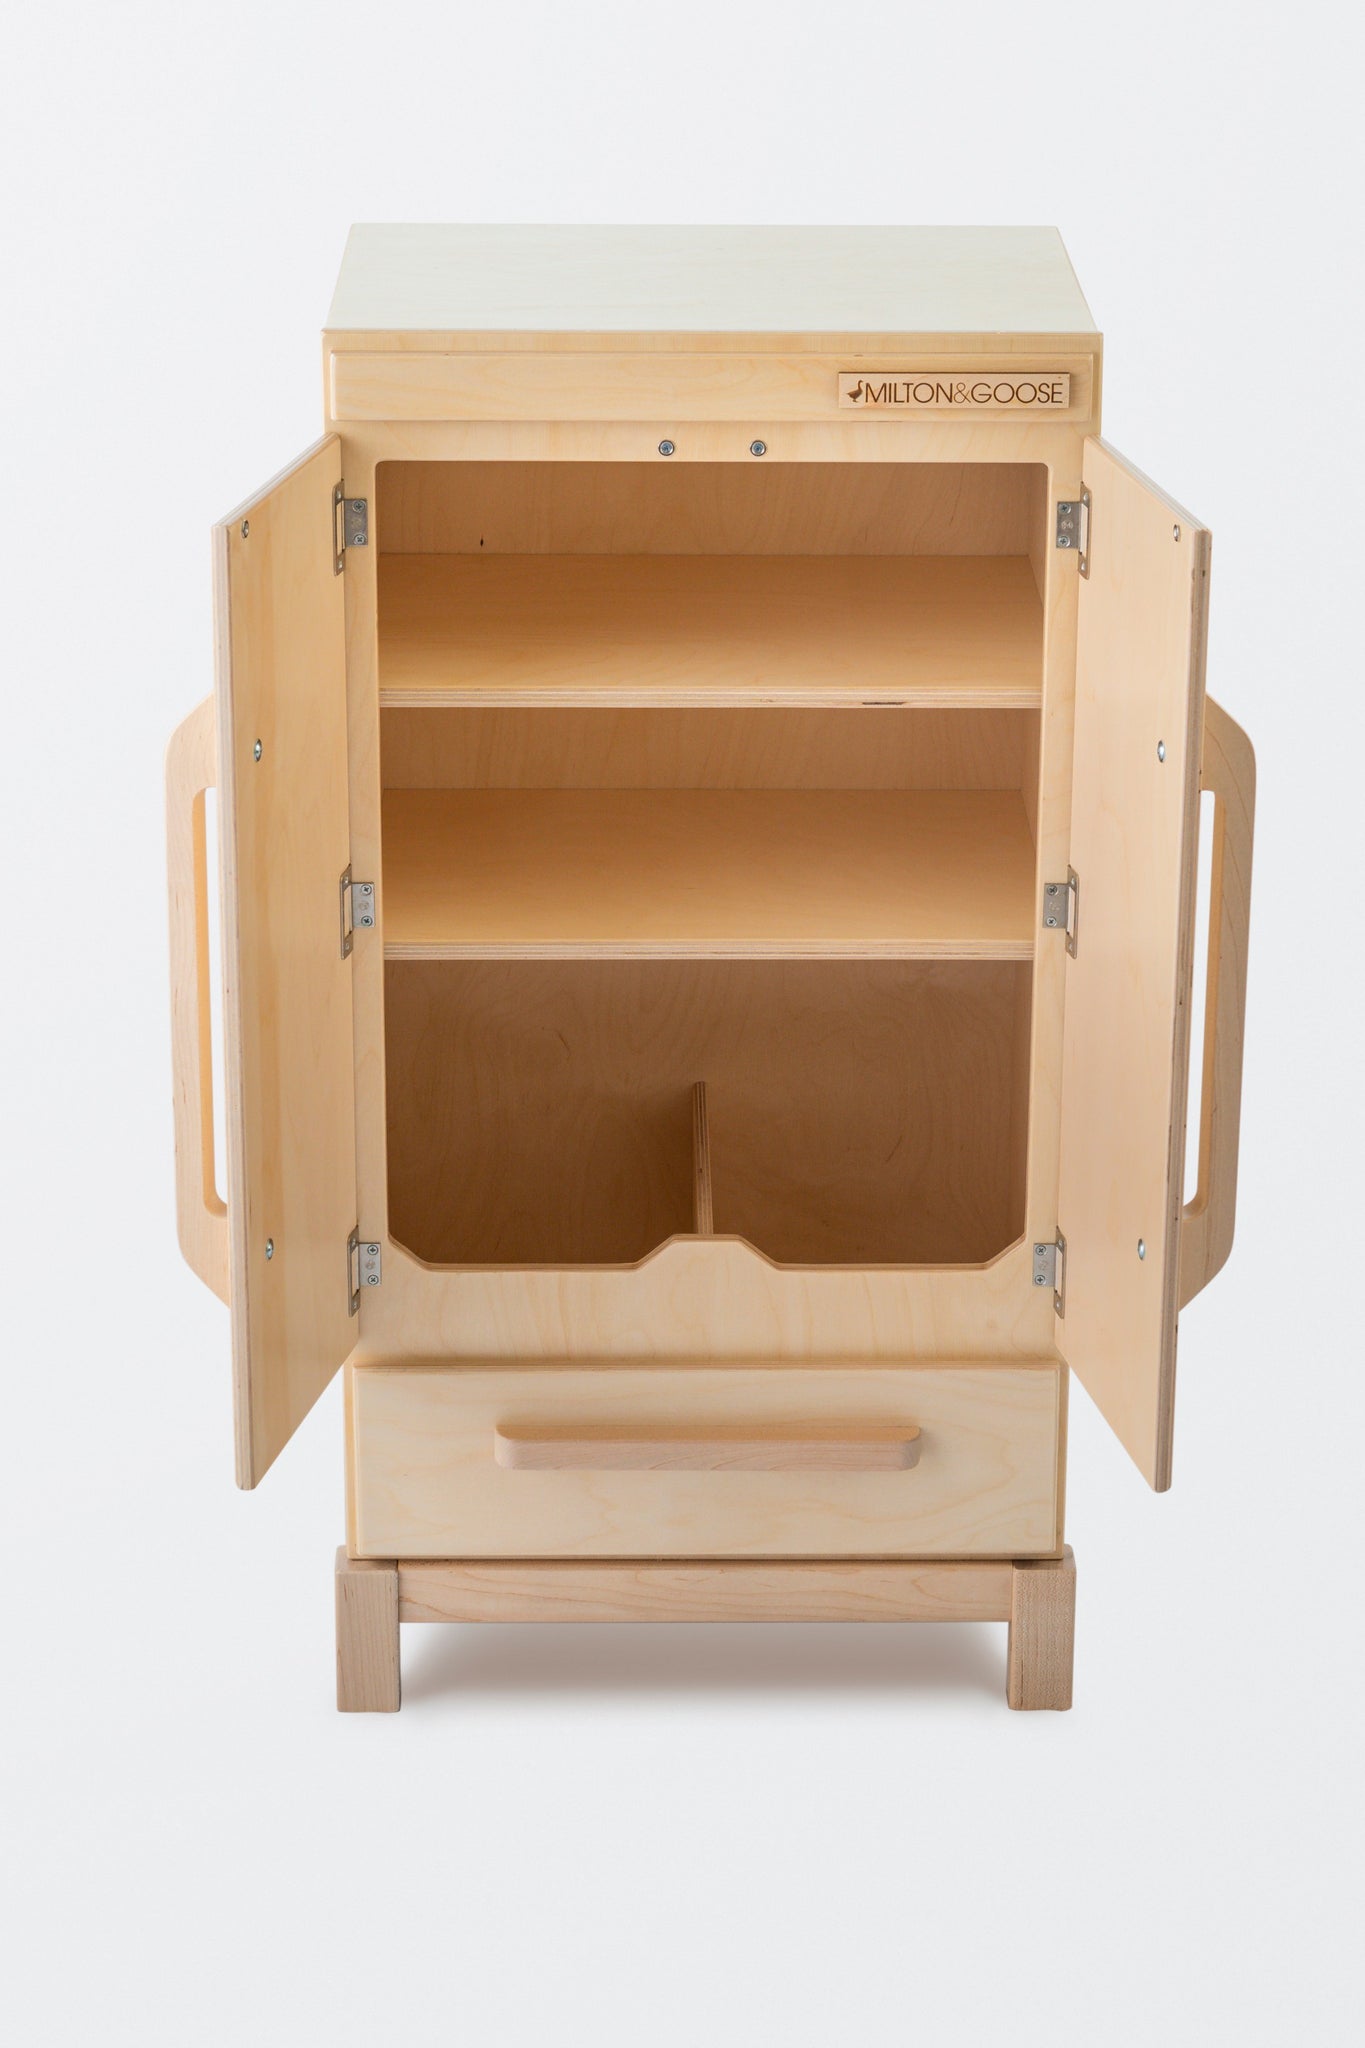 Milton and Goose wood play refrigerator in natural wood tone. Made with sustainable wood and non-toxic finishes. Fridge doors are open to see the interior toy storage.